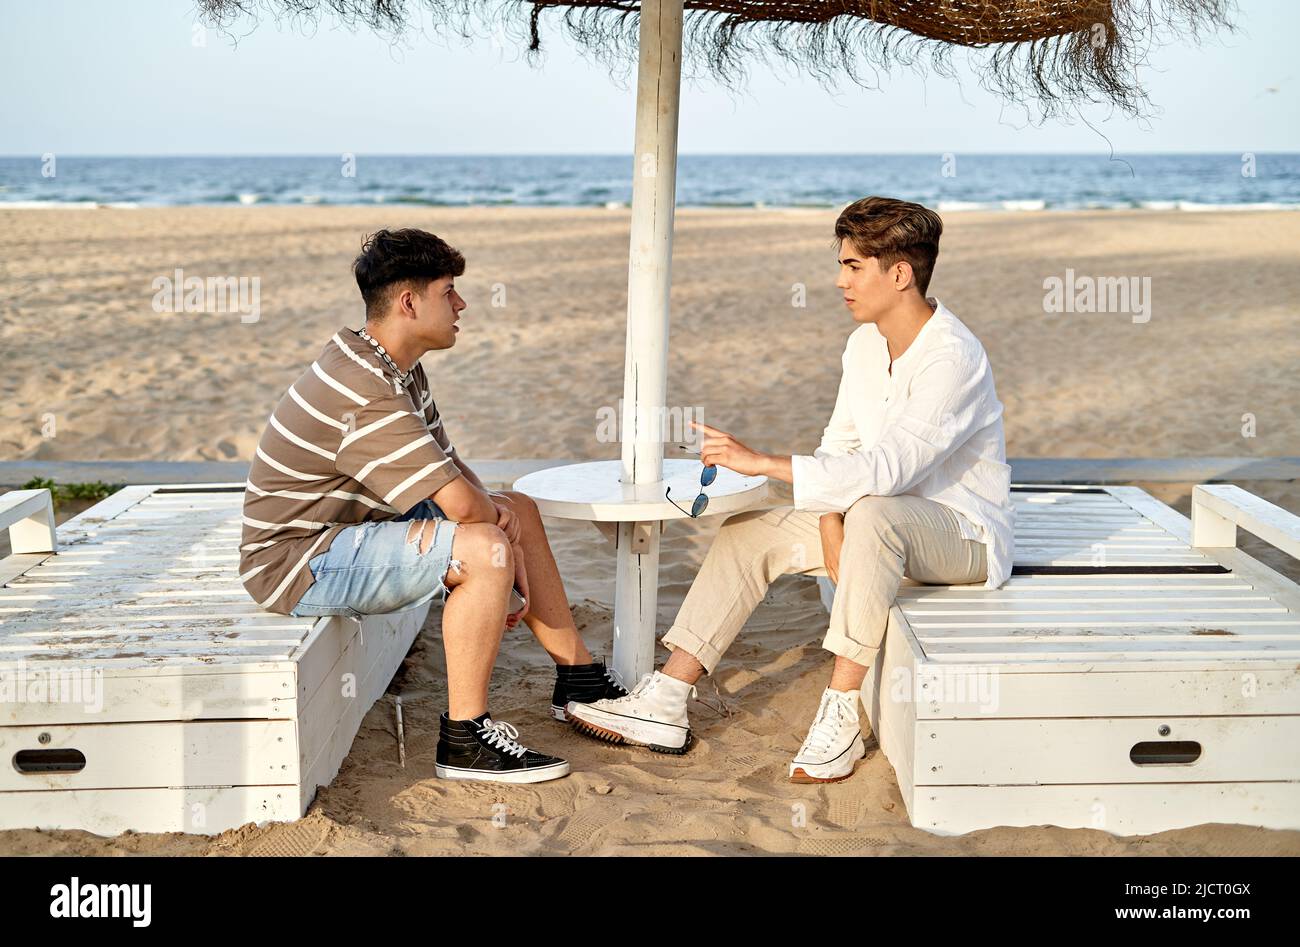 Intimate Moment Between Two Men in the beach Stock Photo